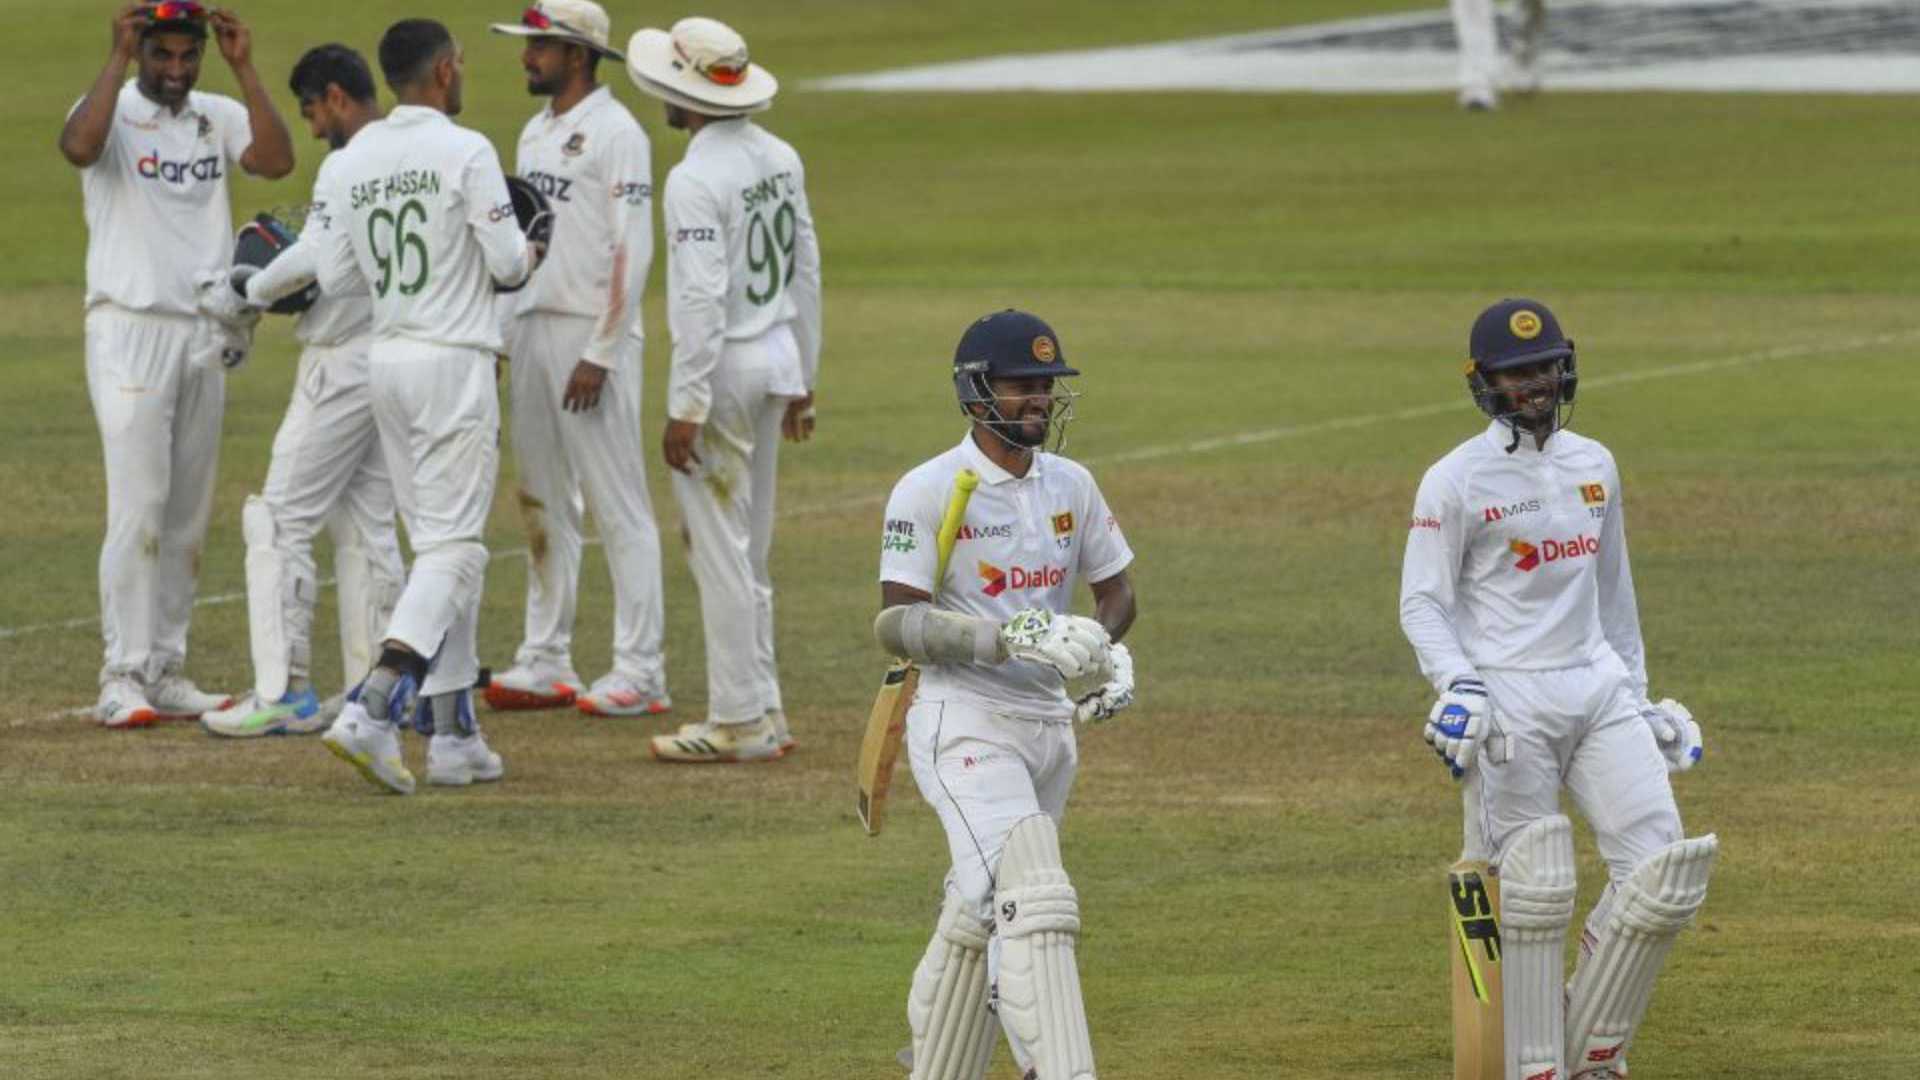 The first Test between Sri Lanka and Bangladesh ended in a draw. (Image credit: SLC)